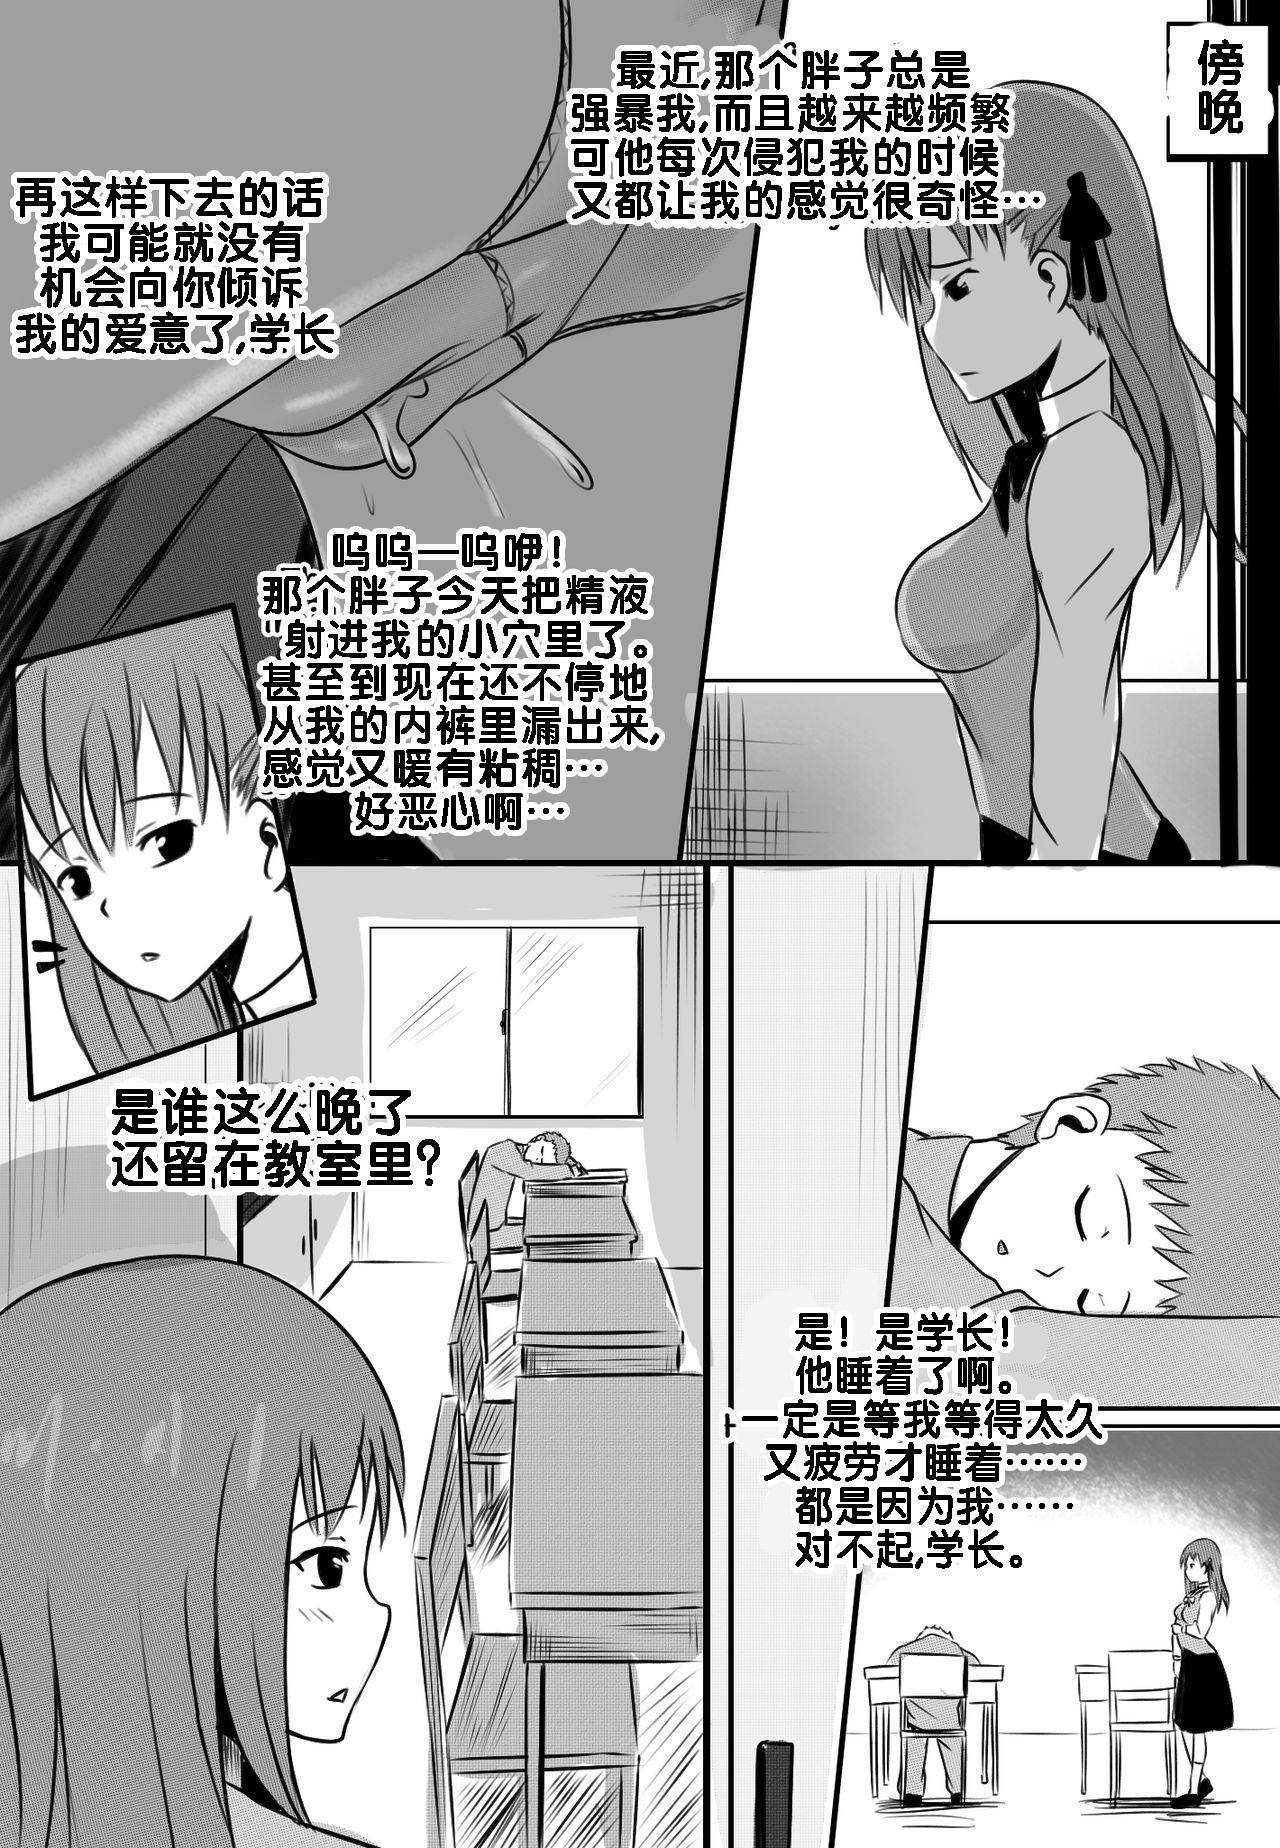 Comendo B-Trayal 10 - Fate stay night Free Porn Amateur - Page 8